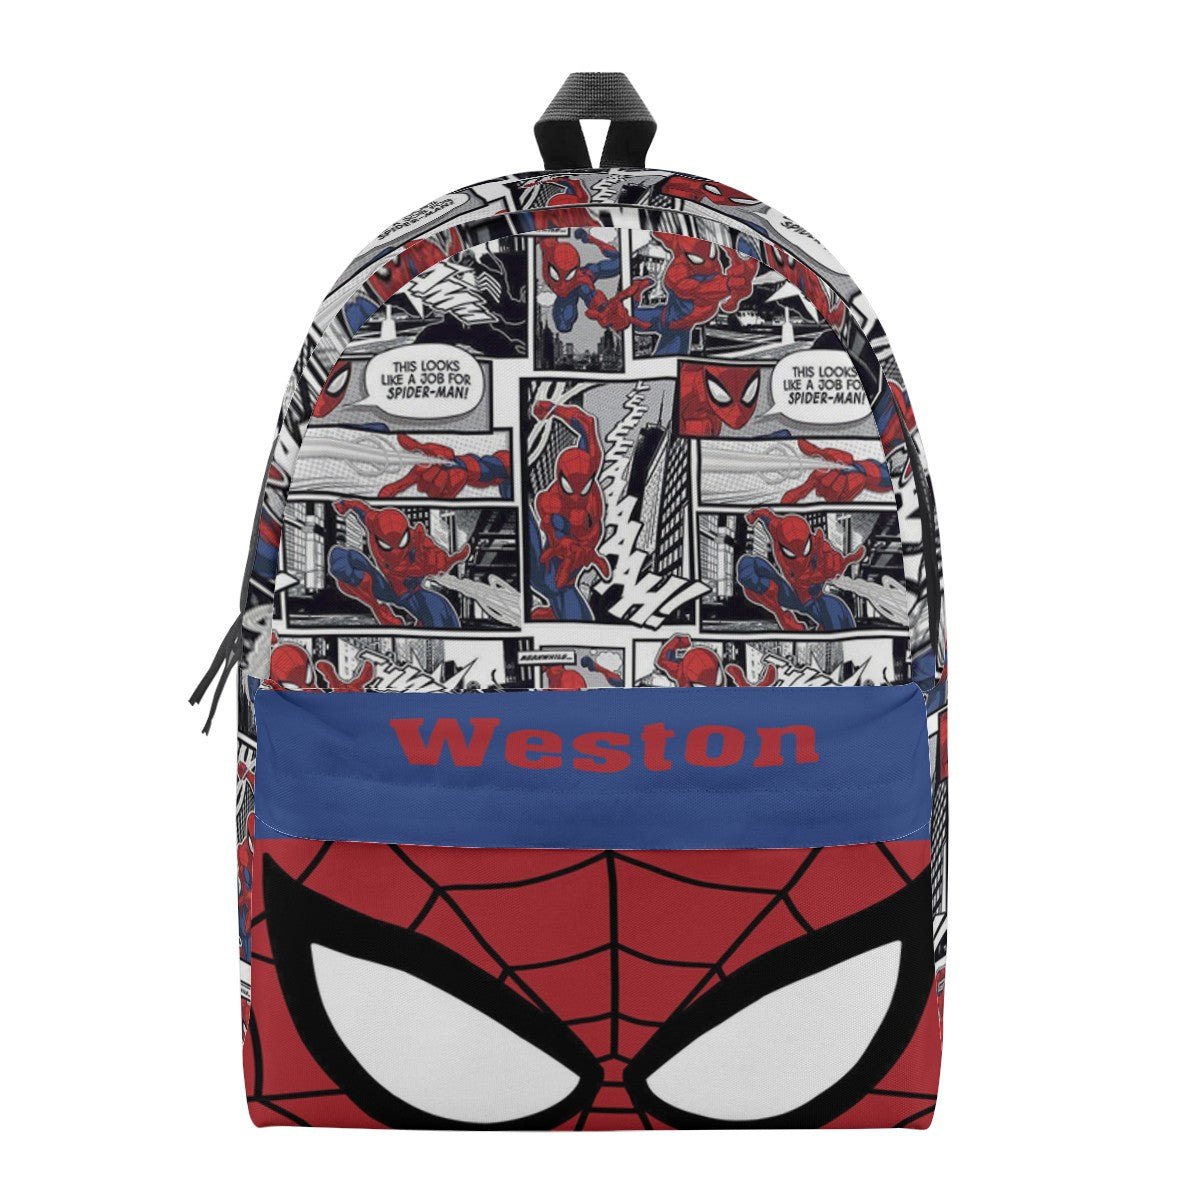 All Customize Back Pack